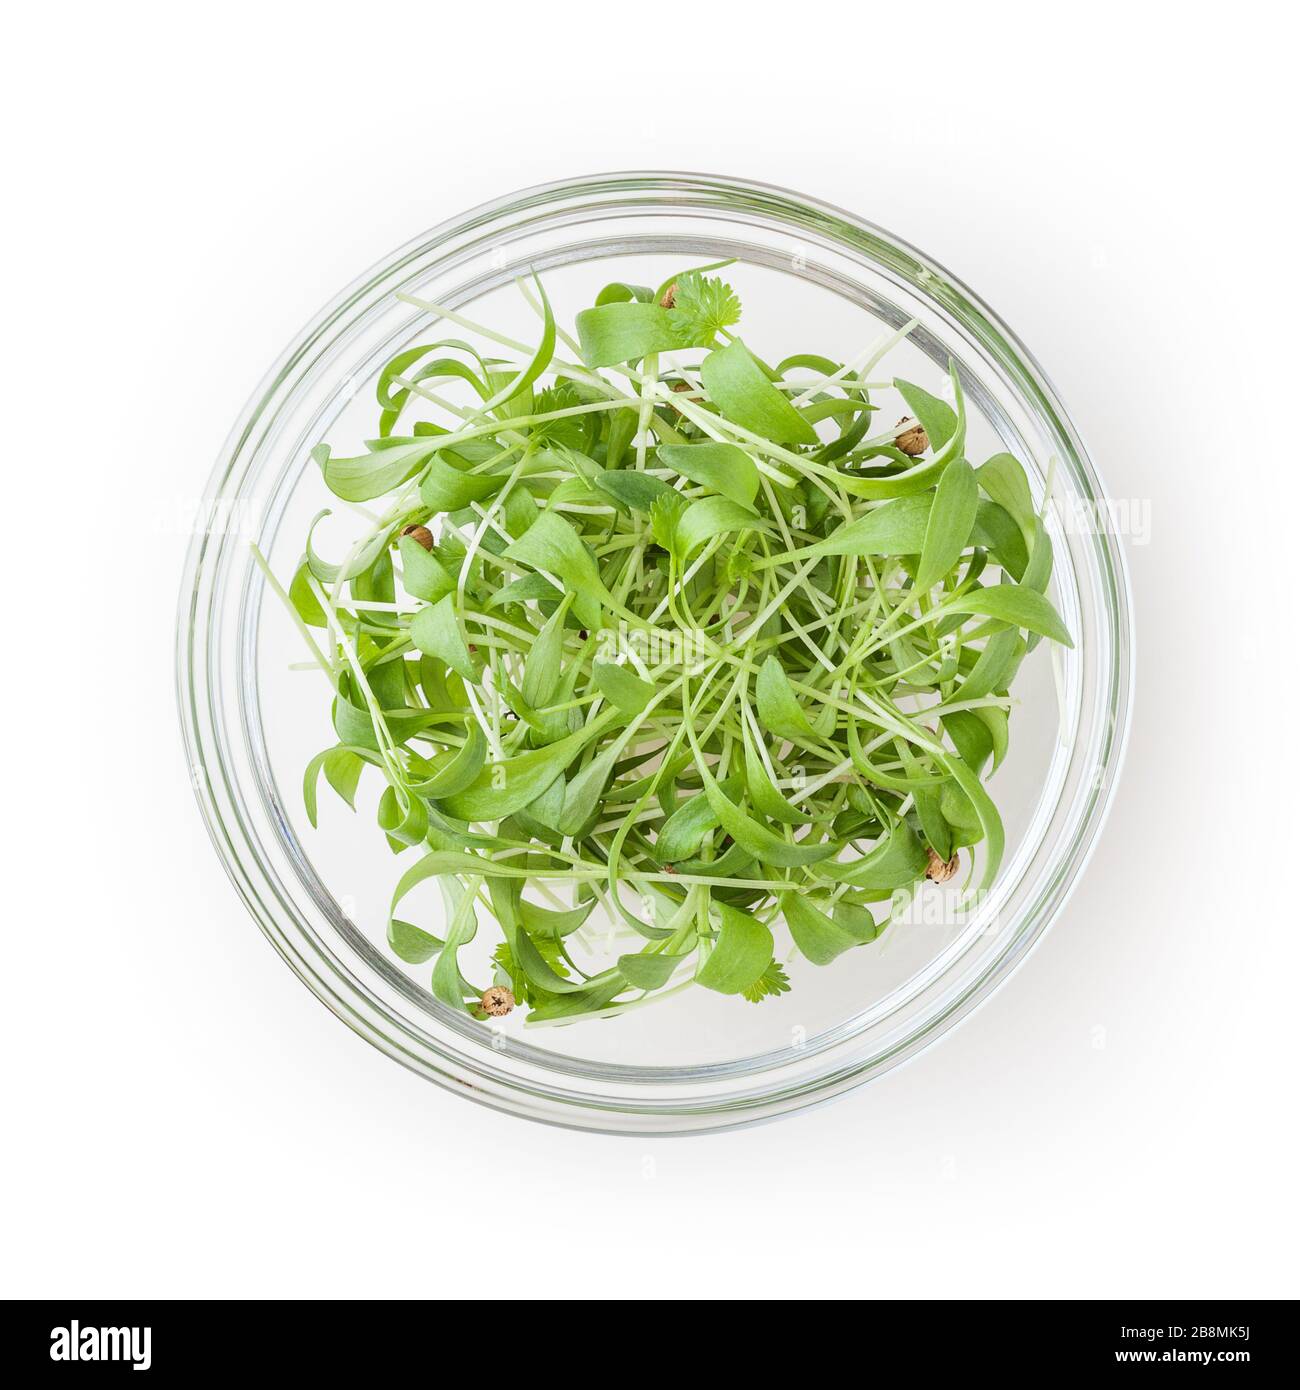 Micro greens coriander sprouts in glass bowl isolated on white background with clipping path Stock Photo